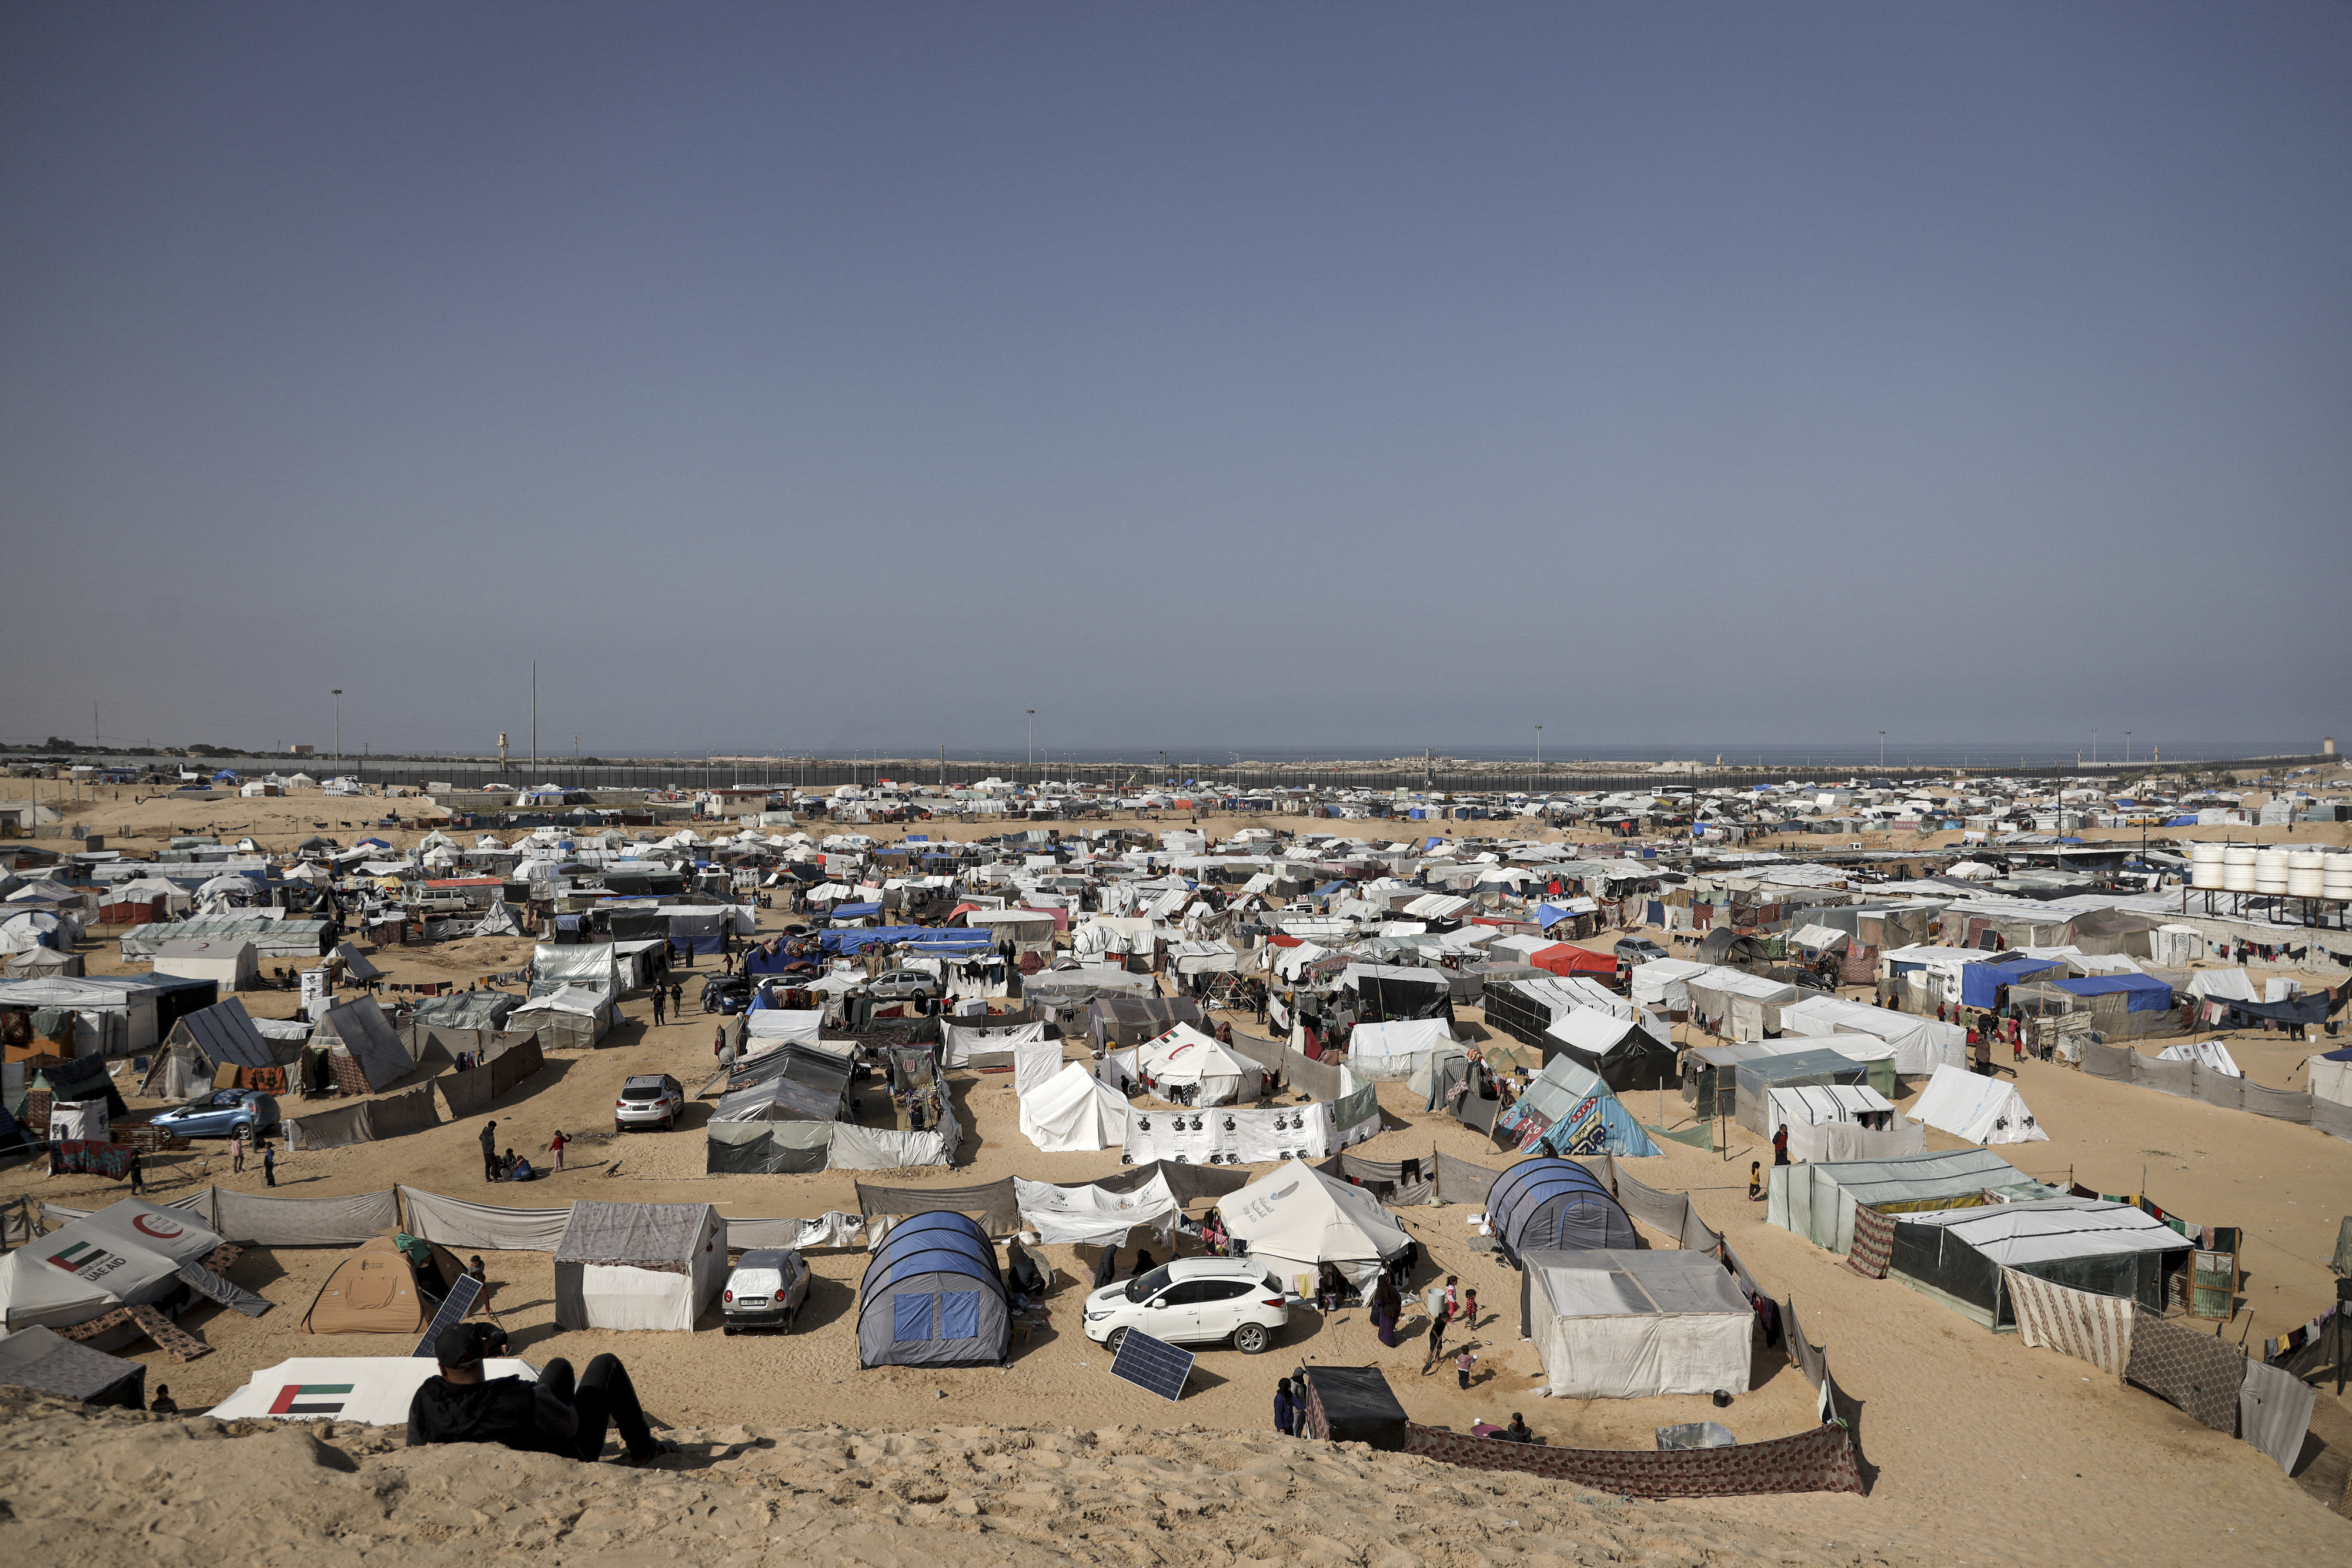 Sprawling refugee camp with tents pitched in a desert area